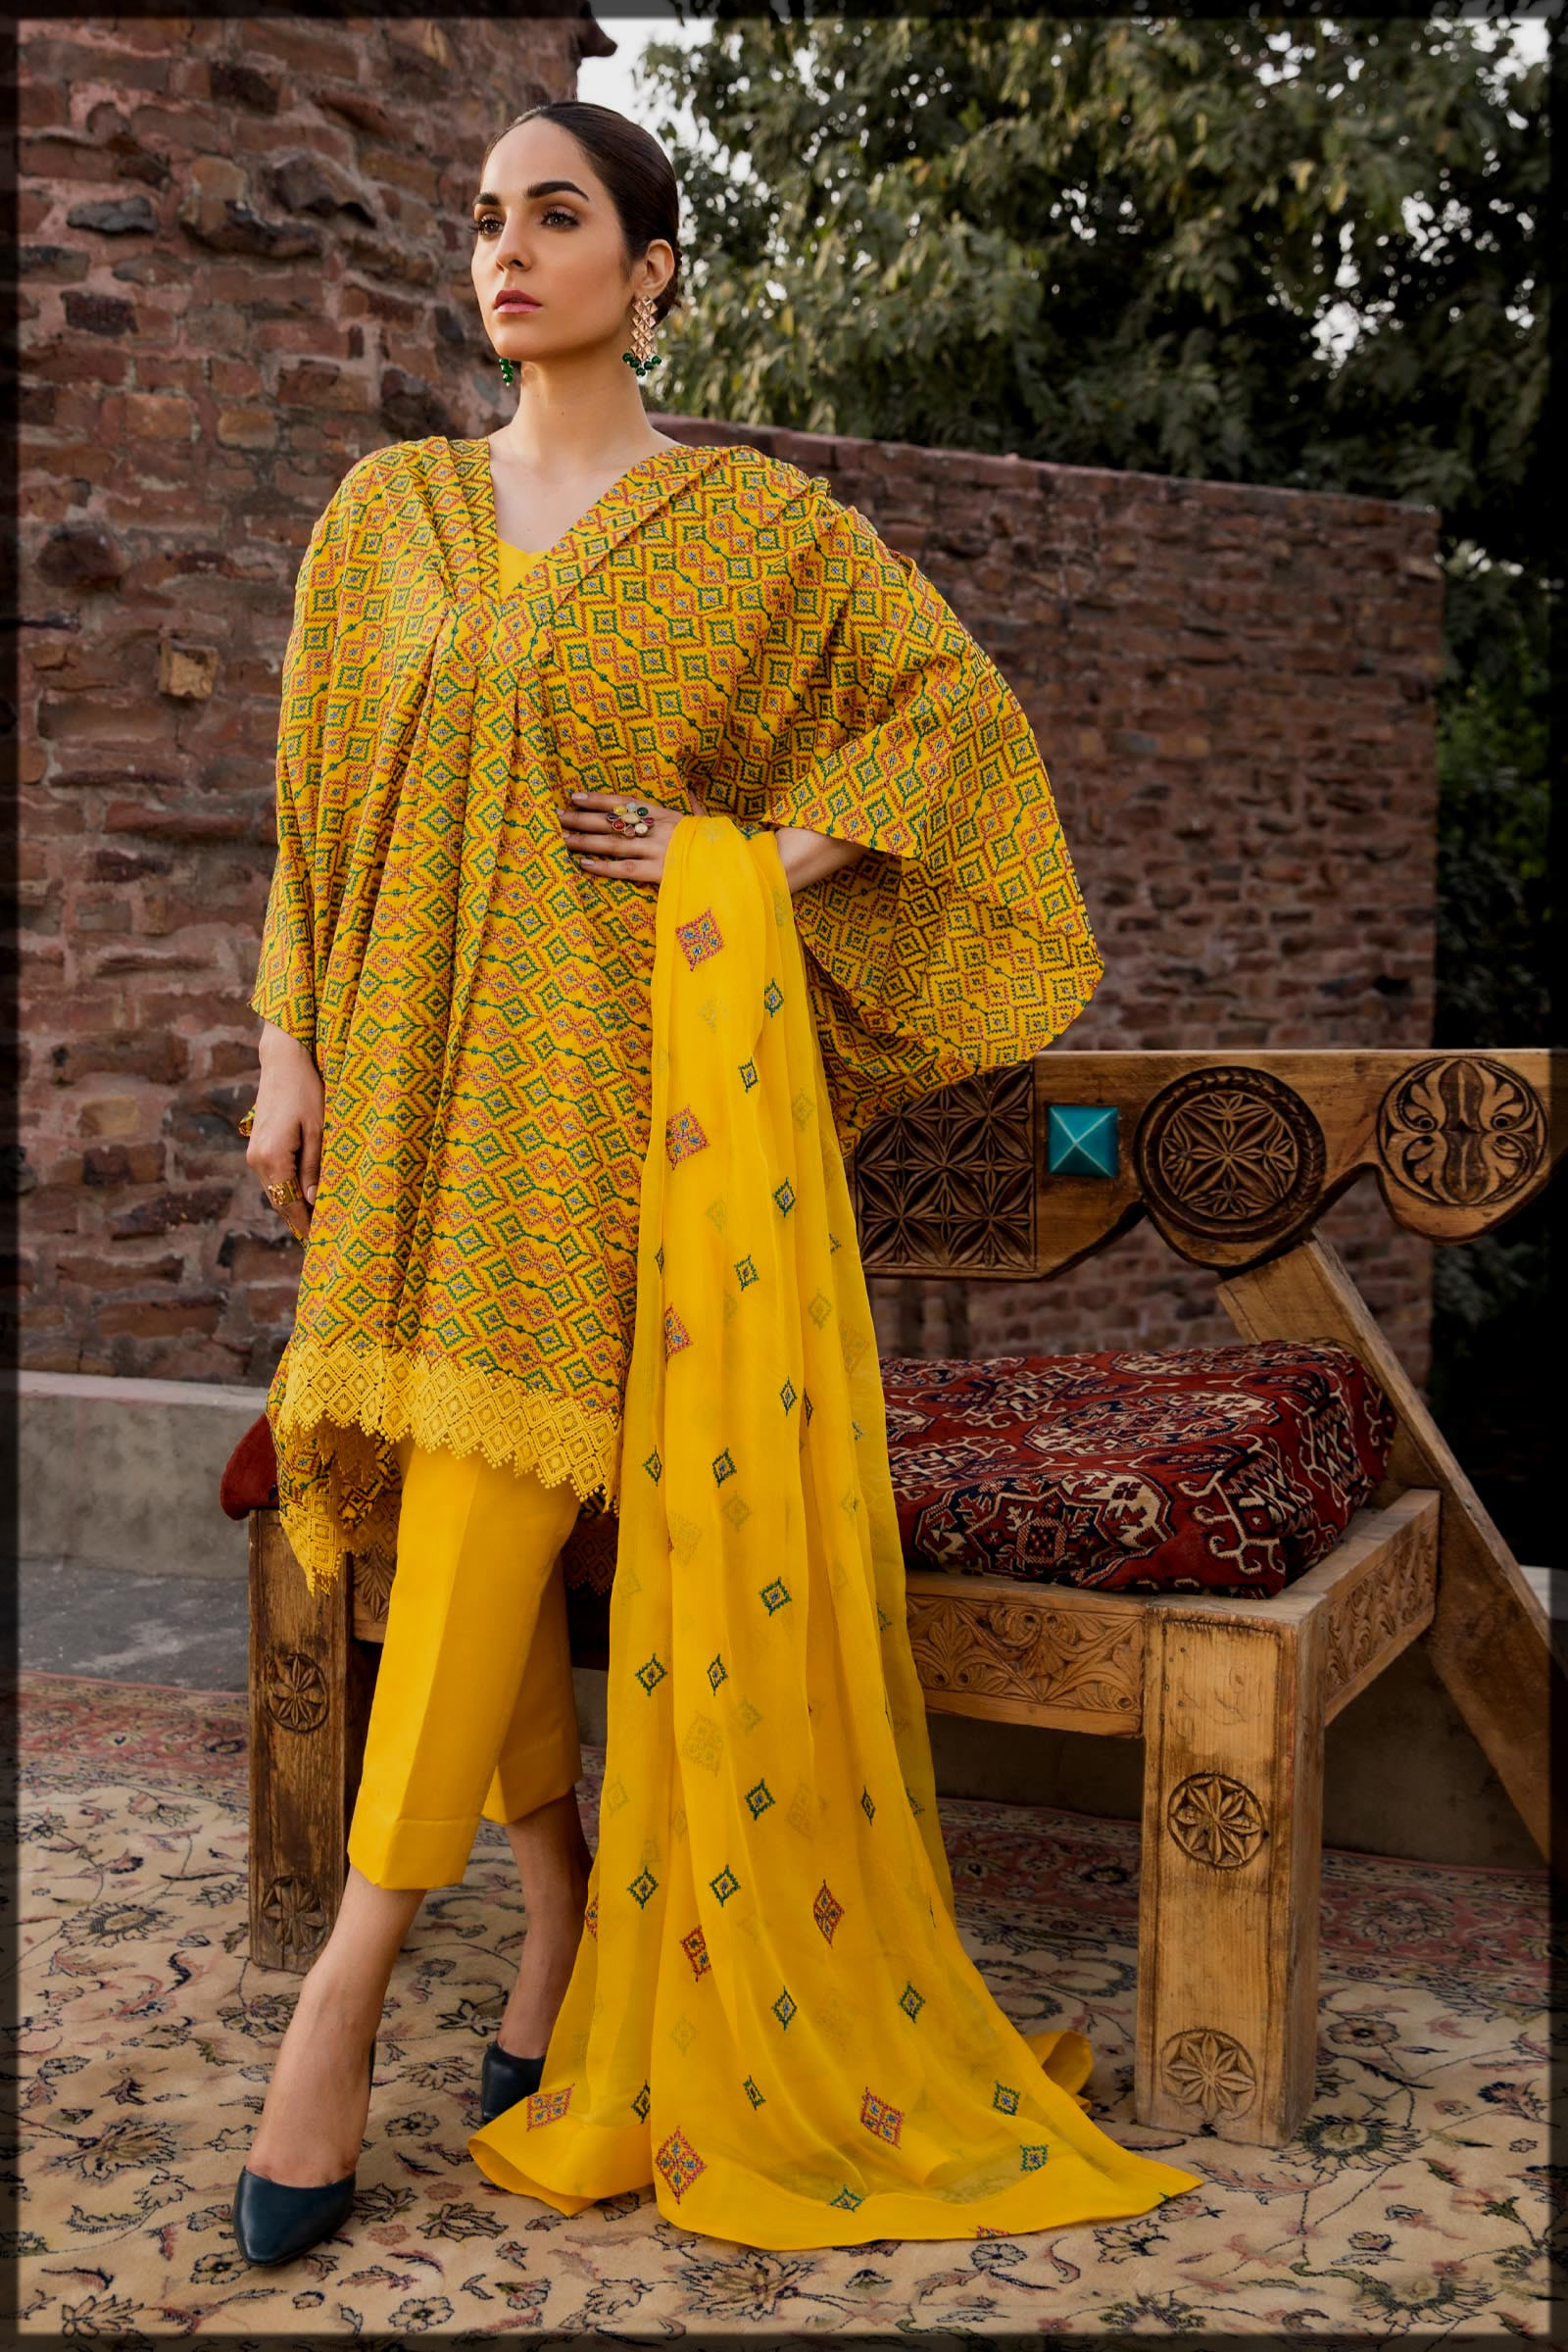 Bareeze Summer Collection 2023 Price Bareeze Pk Lawn | vlr.eng.br